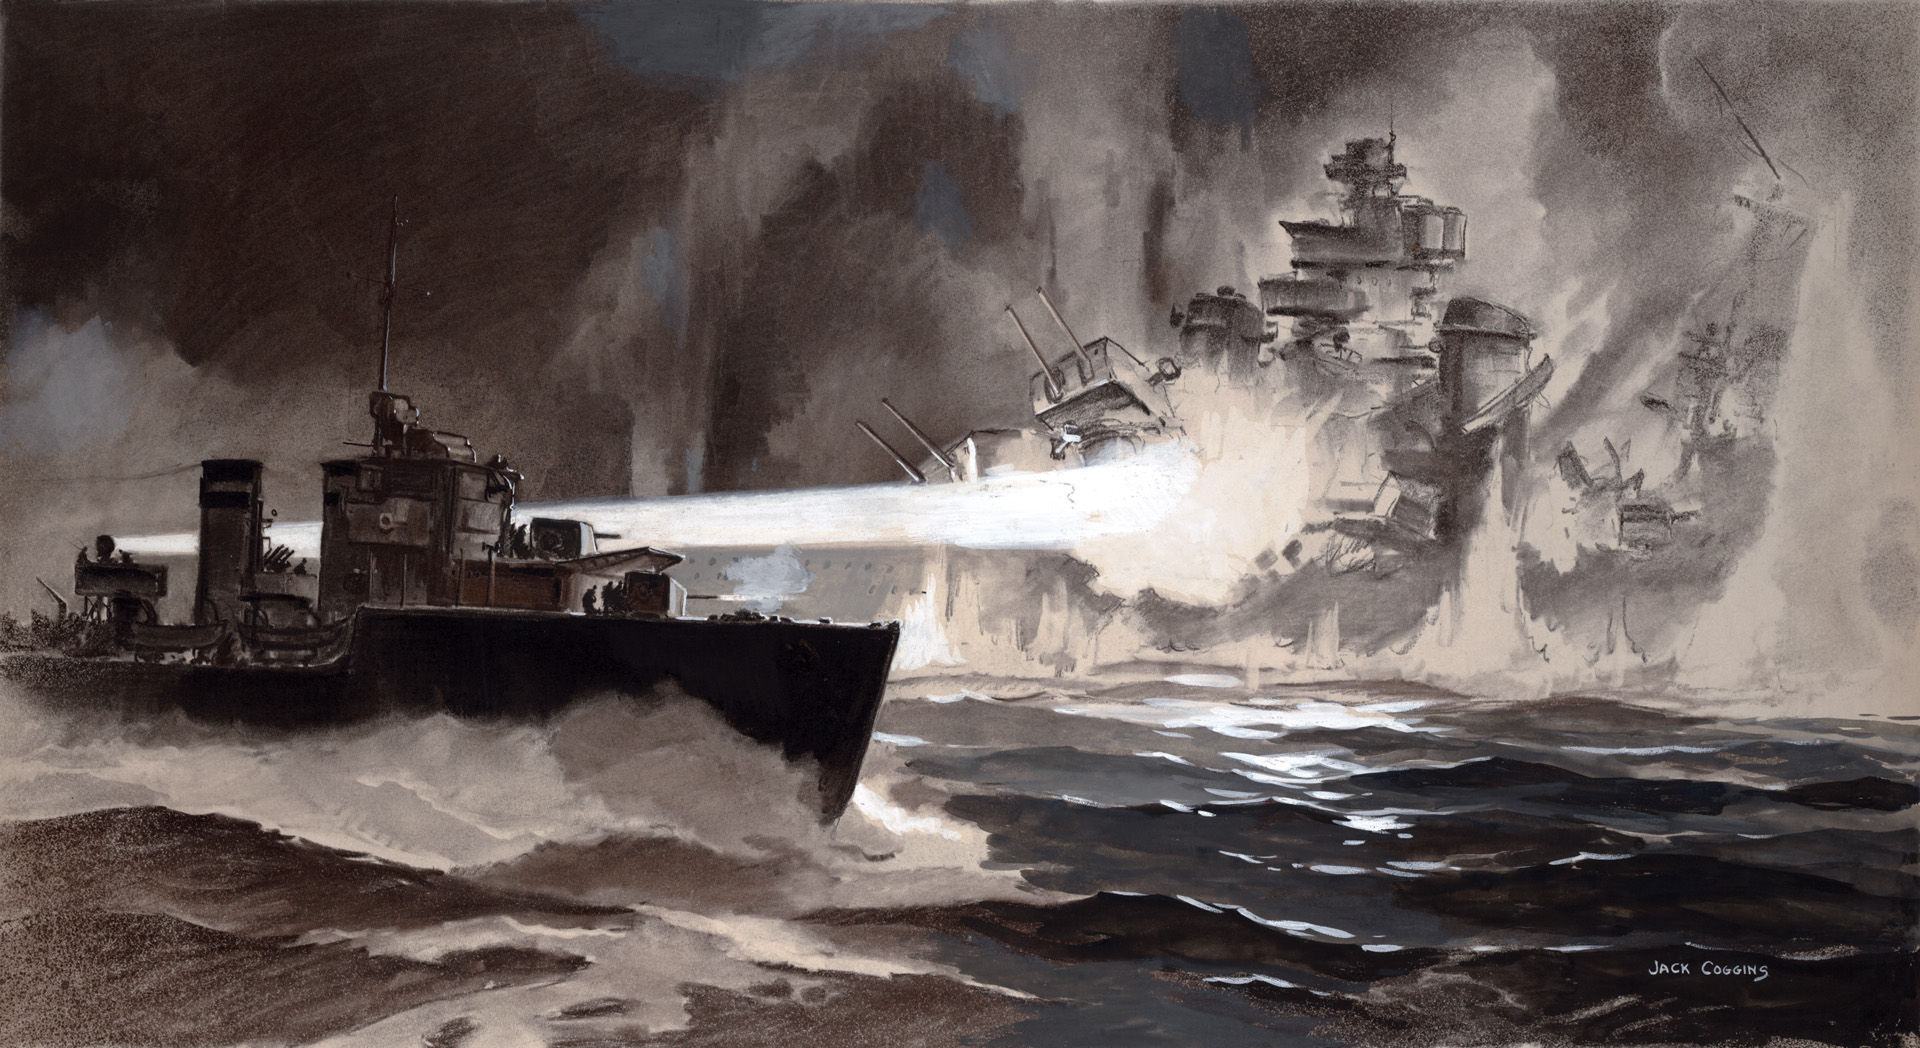 During the Battle of Cape Matapan, the searchlight of the British destroyer Greyhound catches the Italian cruiser Fiume in its beam. The Italian fleet was thoroughly defeated during the night battle  in 1941. 